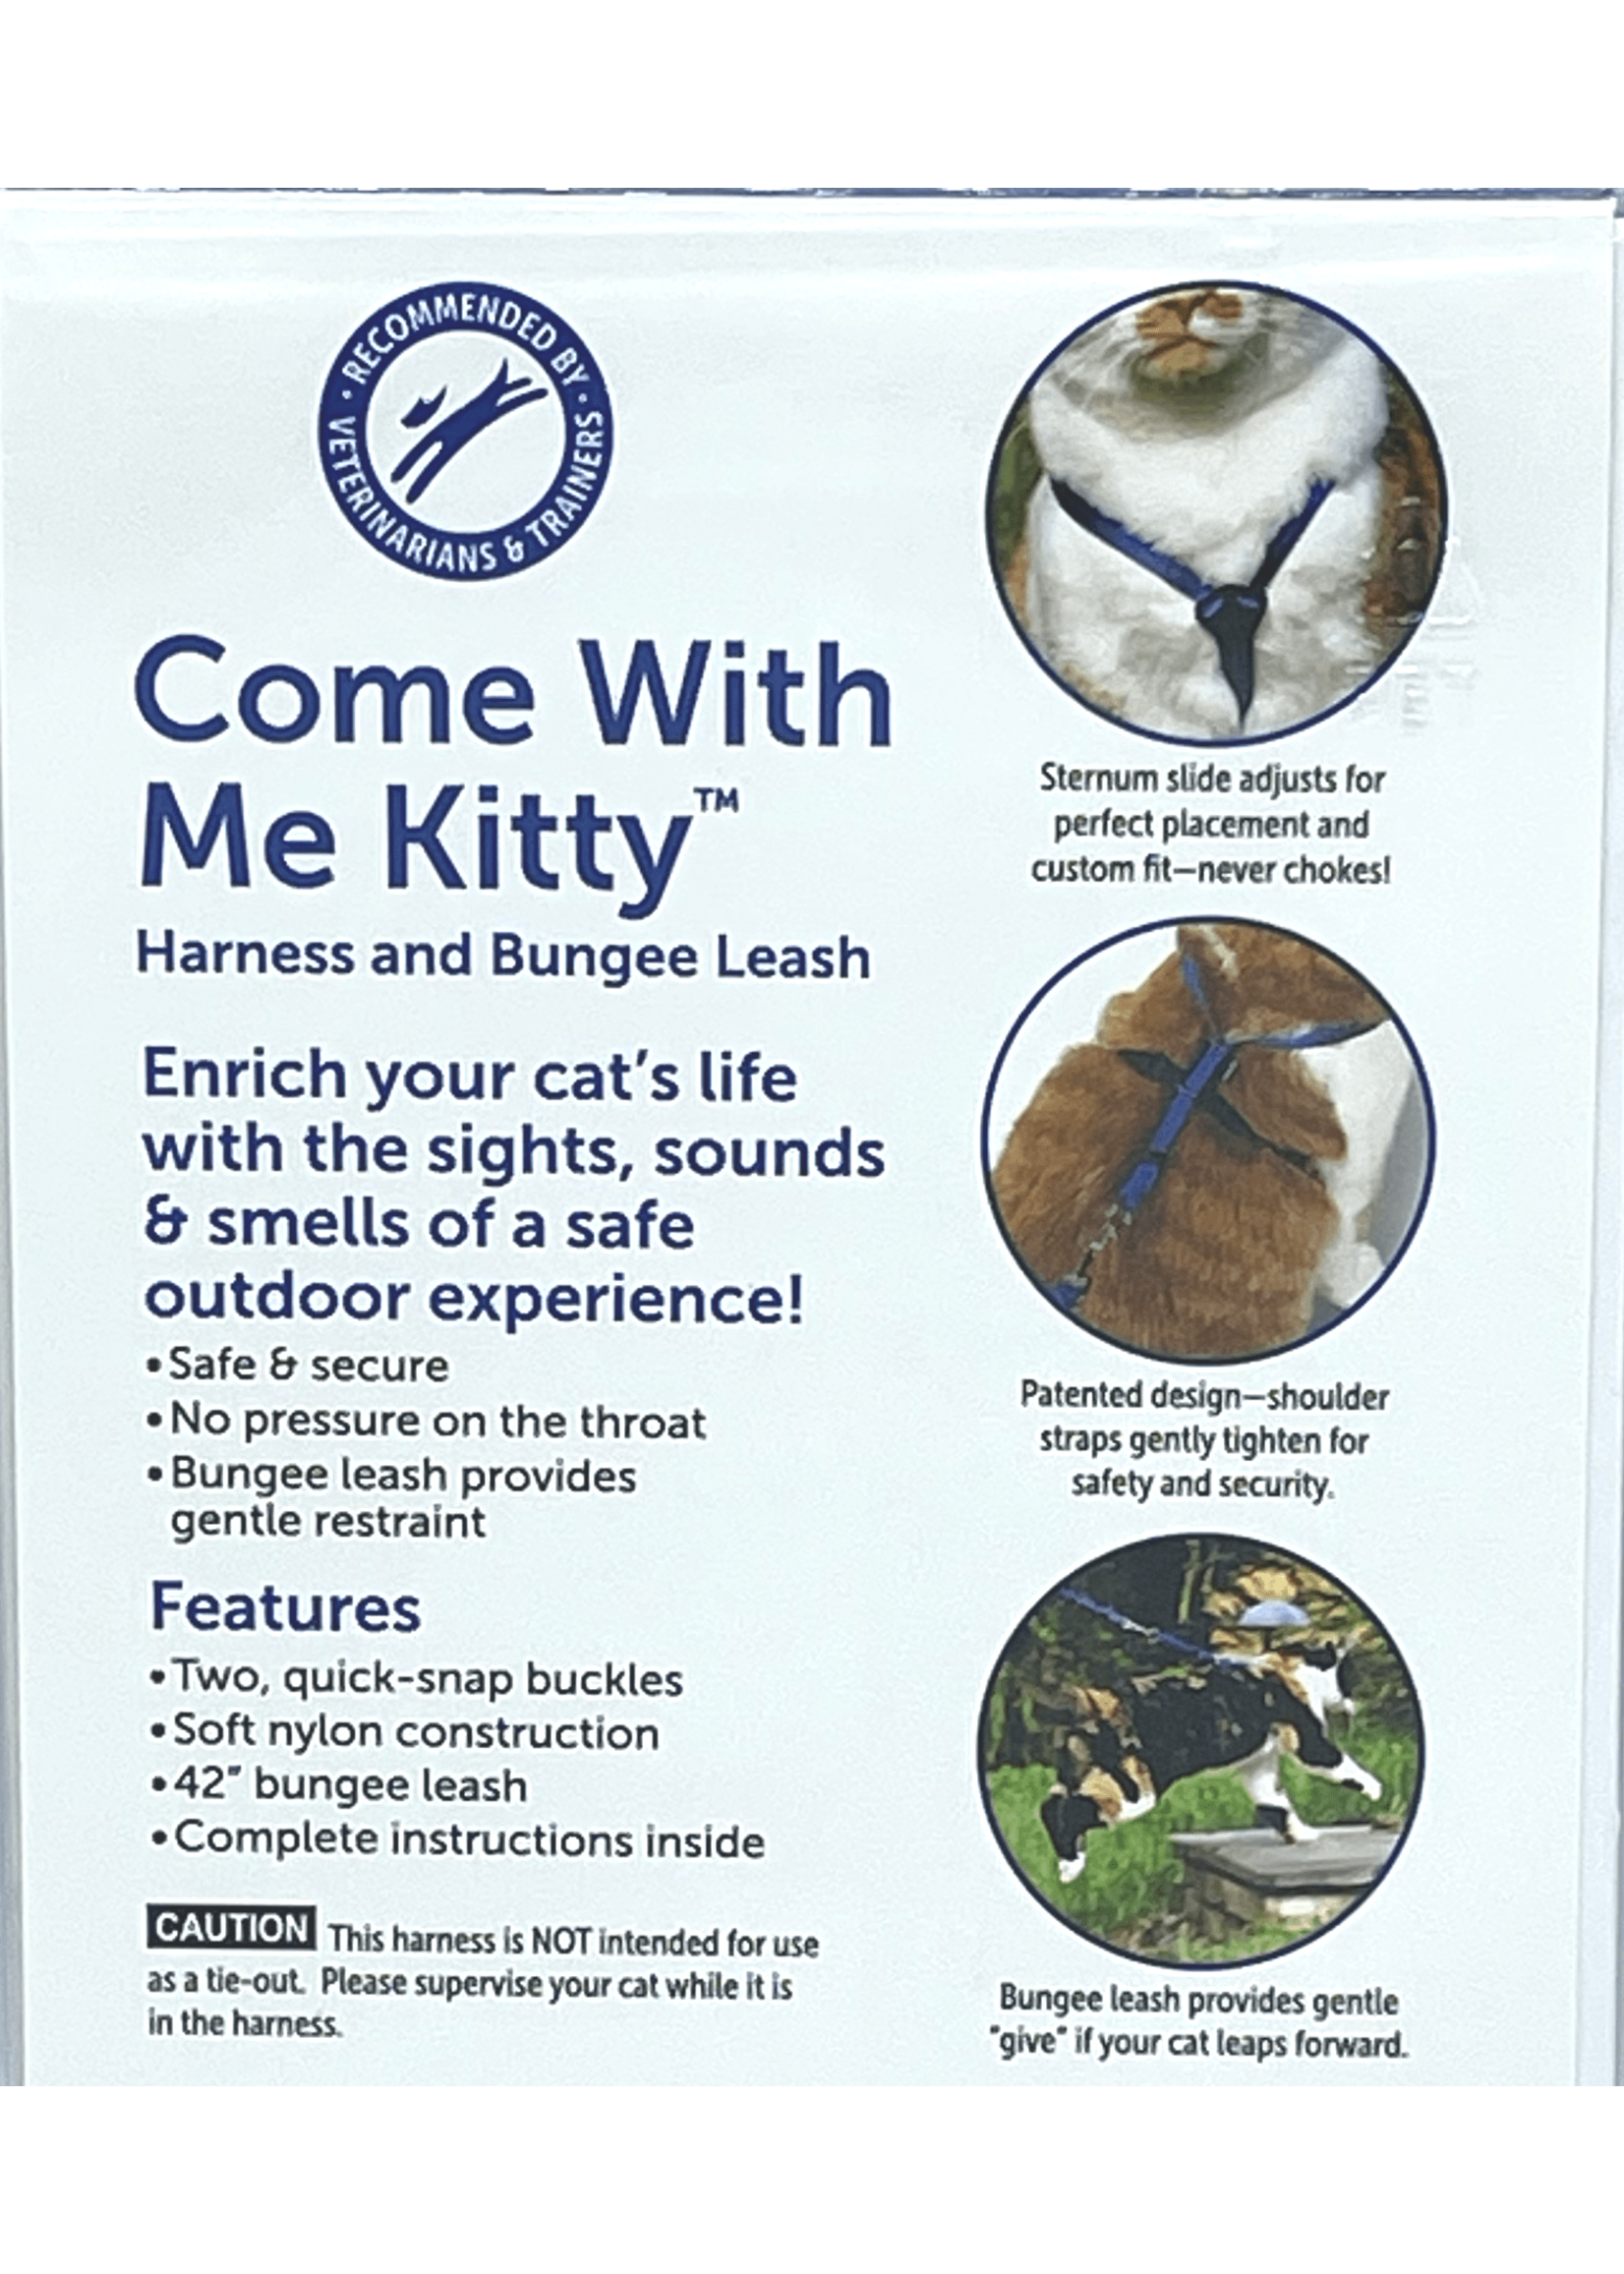 Pet Safe Come With Me Kitty Cat Harness & Bungee Leash